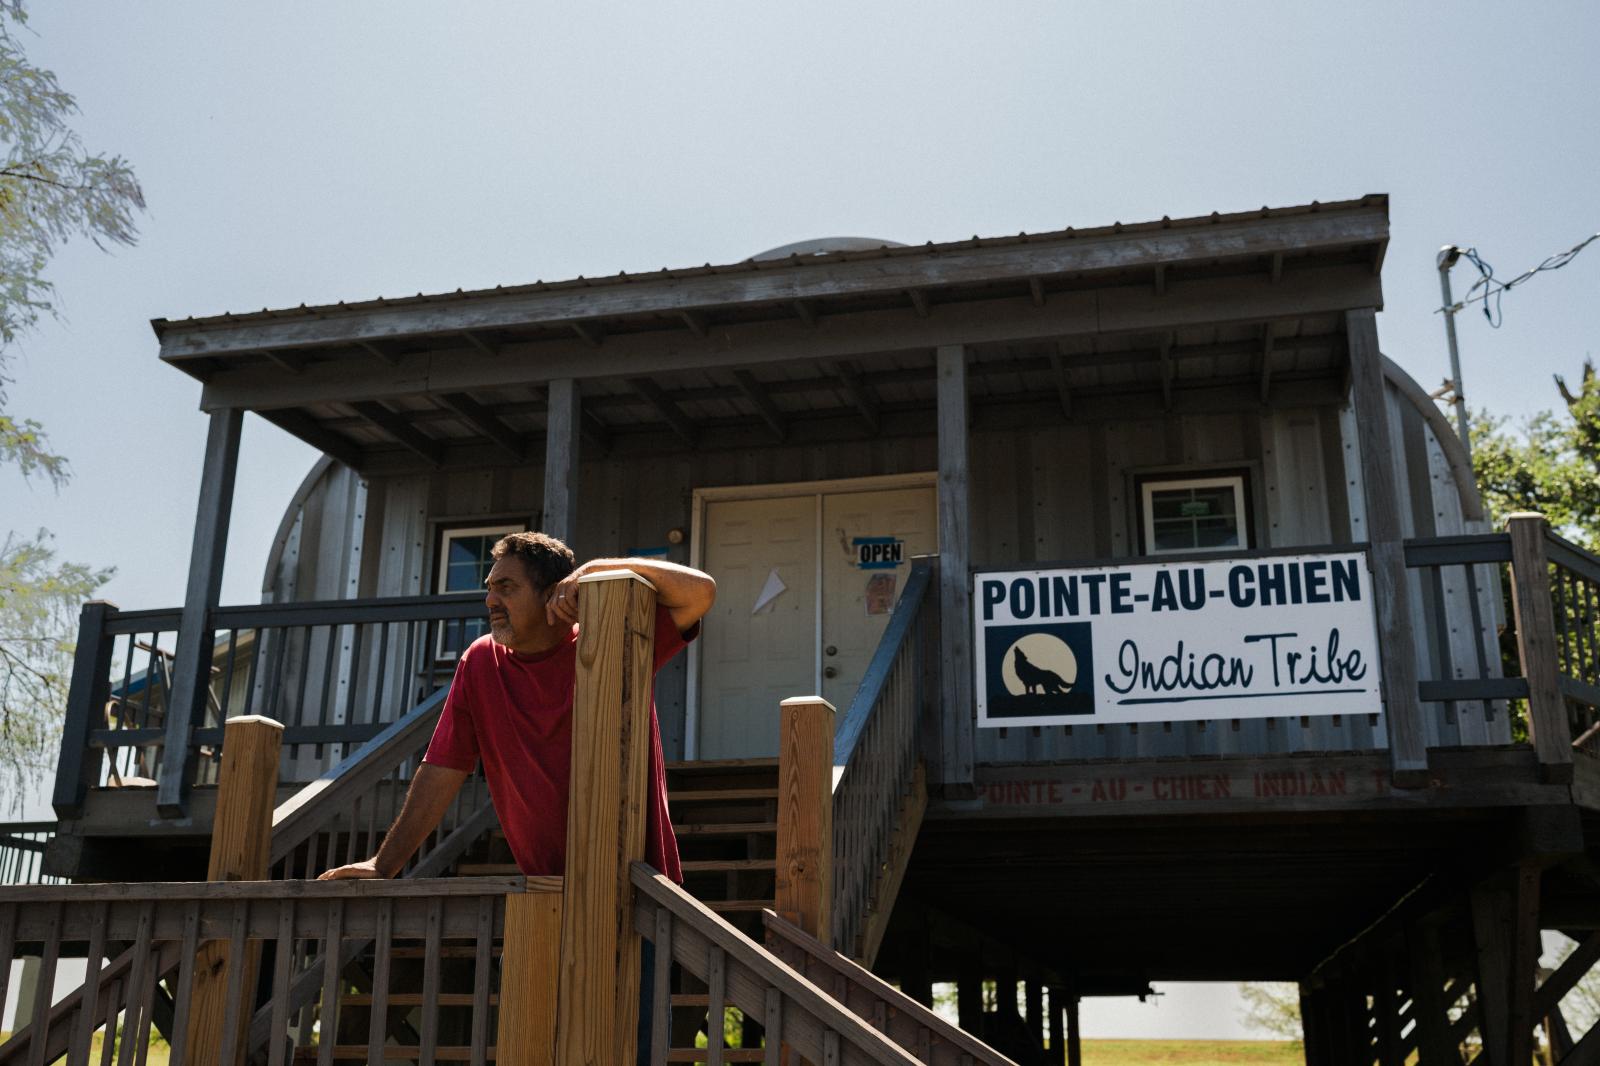 Pointe-au-Chien is not dead - The Pointe-au-Chien Indian Tribe is governed by a Tribal...